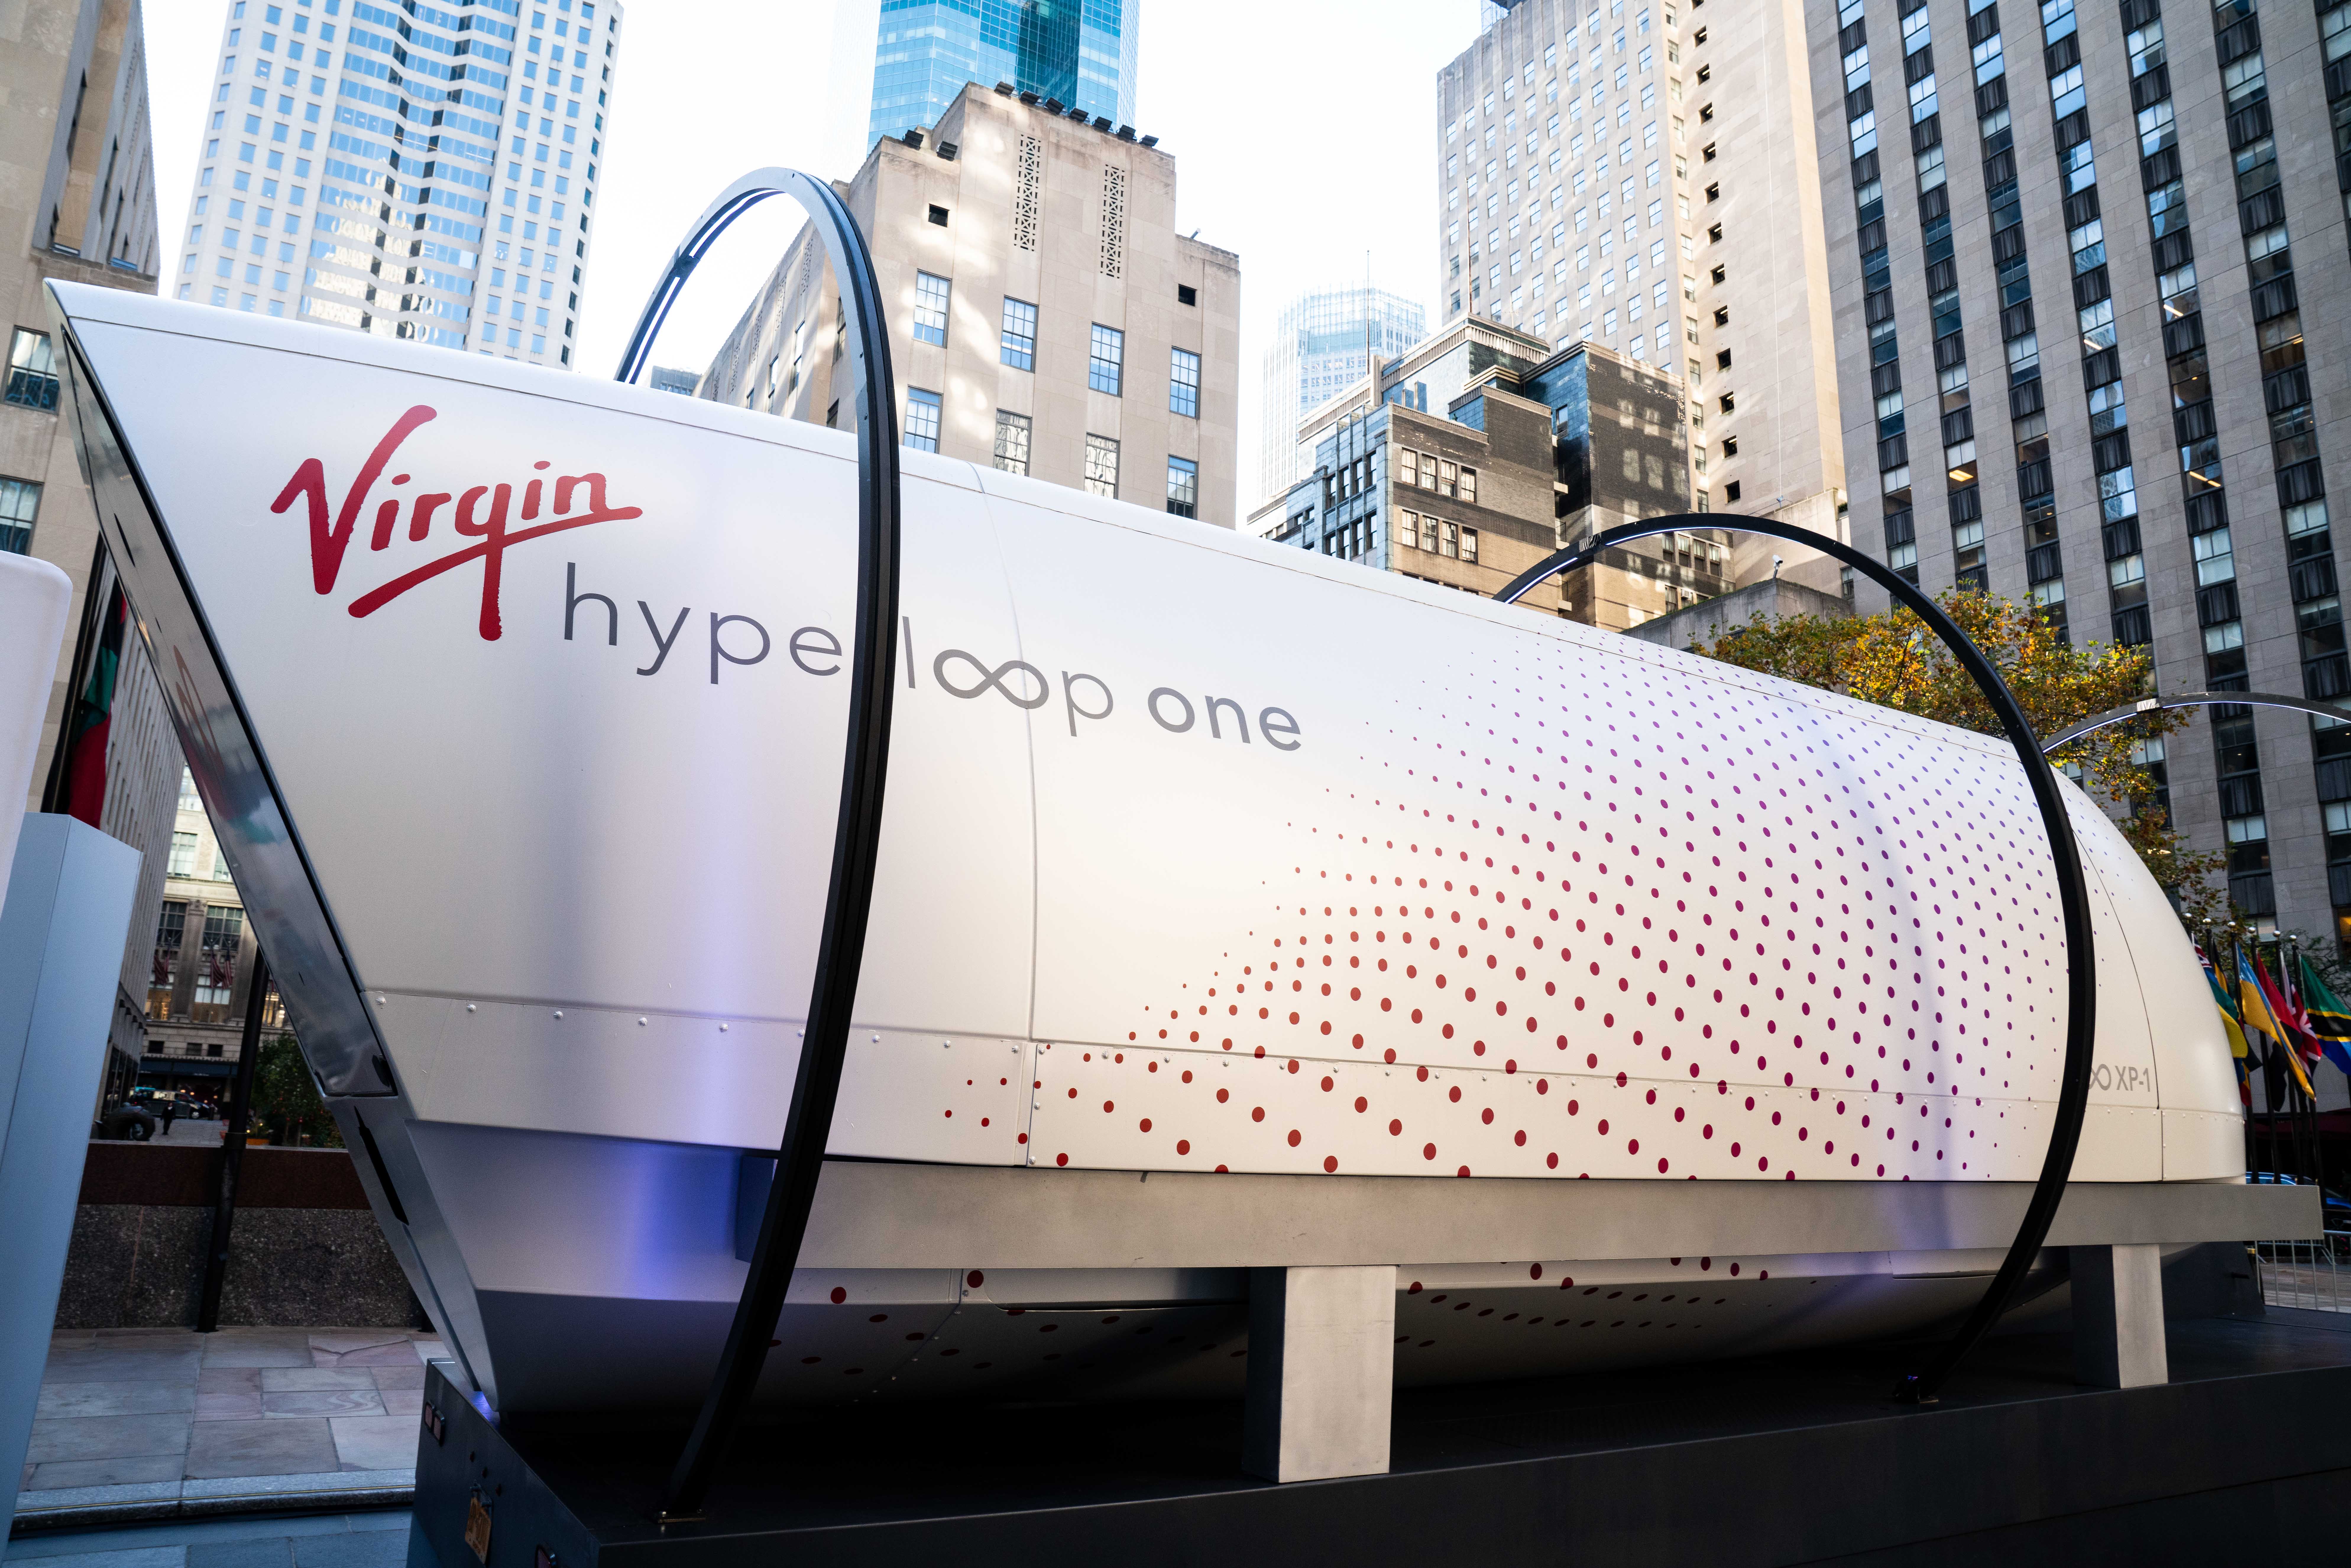 picture of Virgin Hyper loope one pod in New York